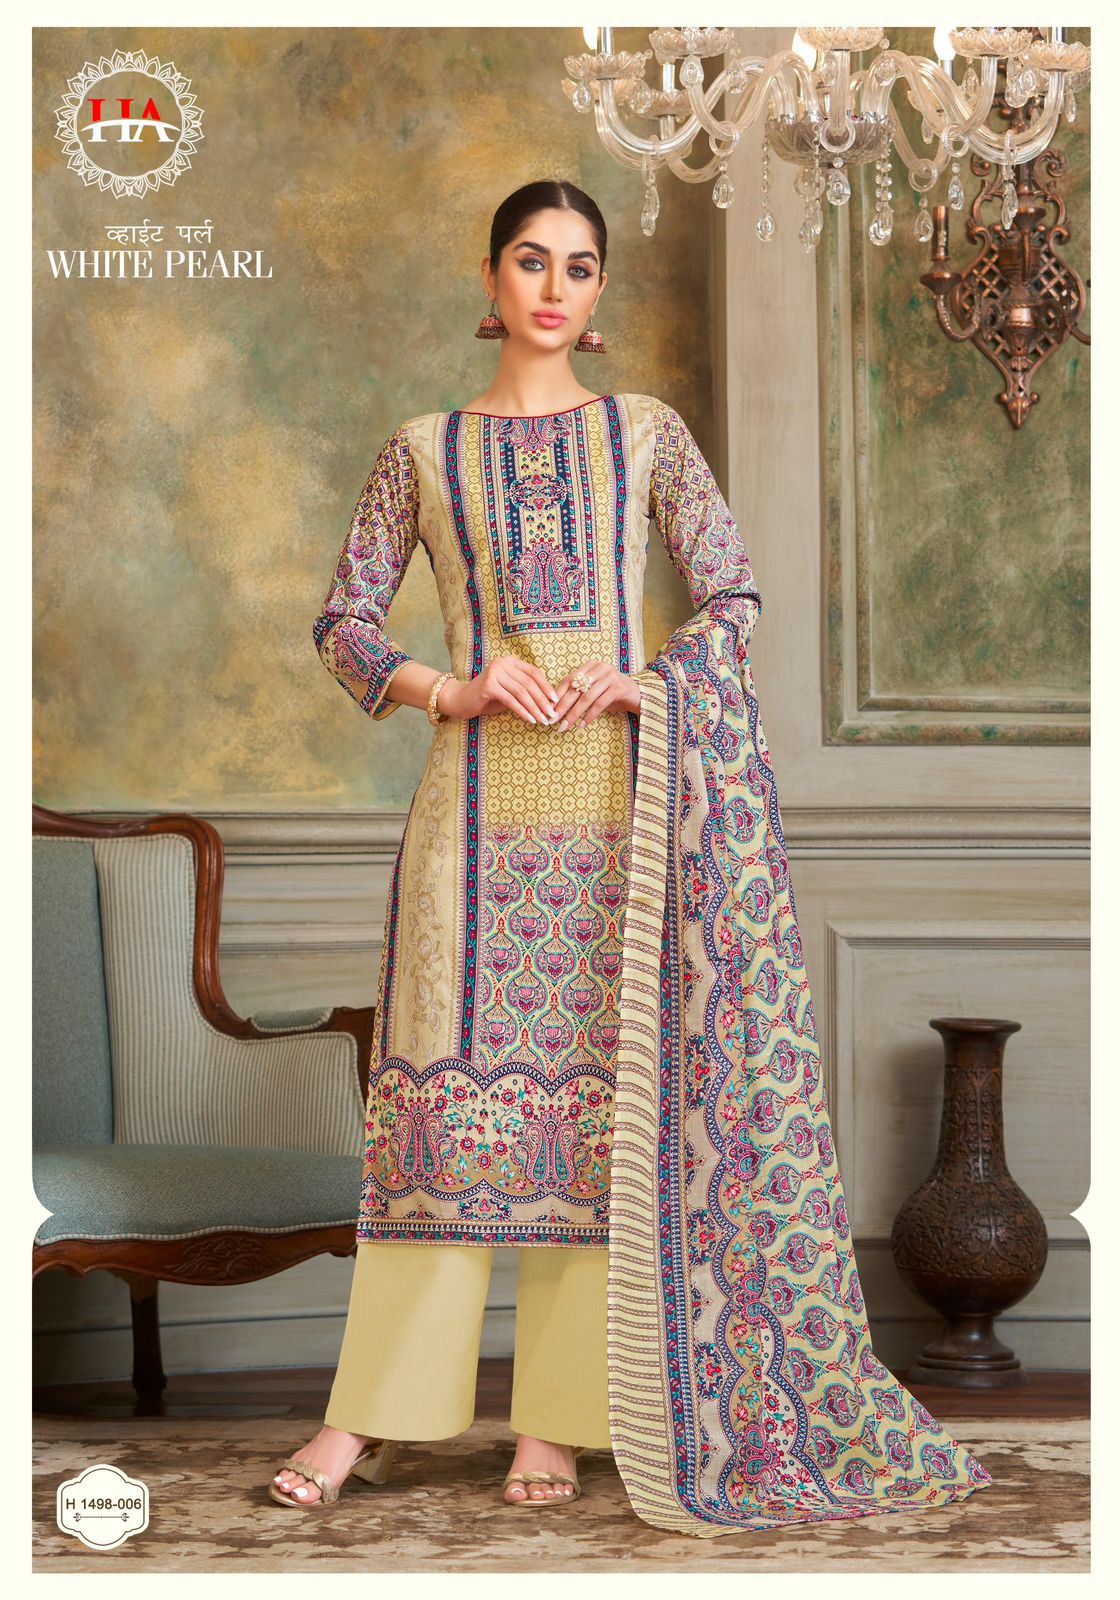 White Pearl Harshit Fashion Cambric Cotton Pant Style Suits